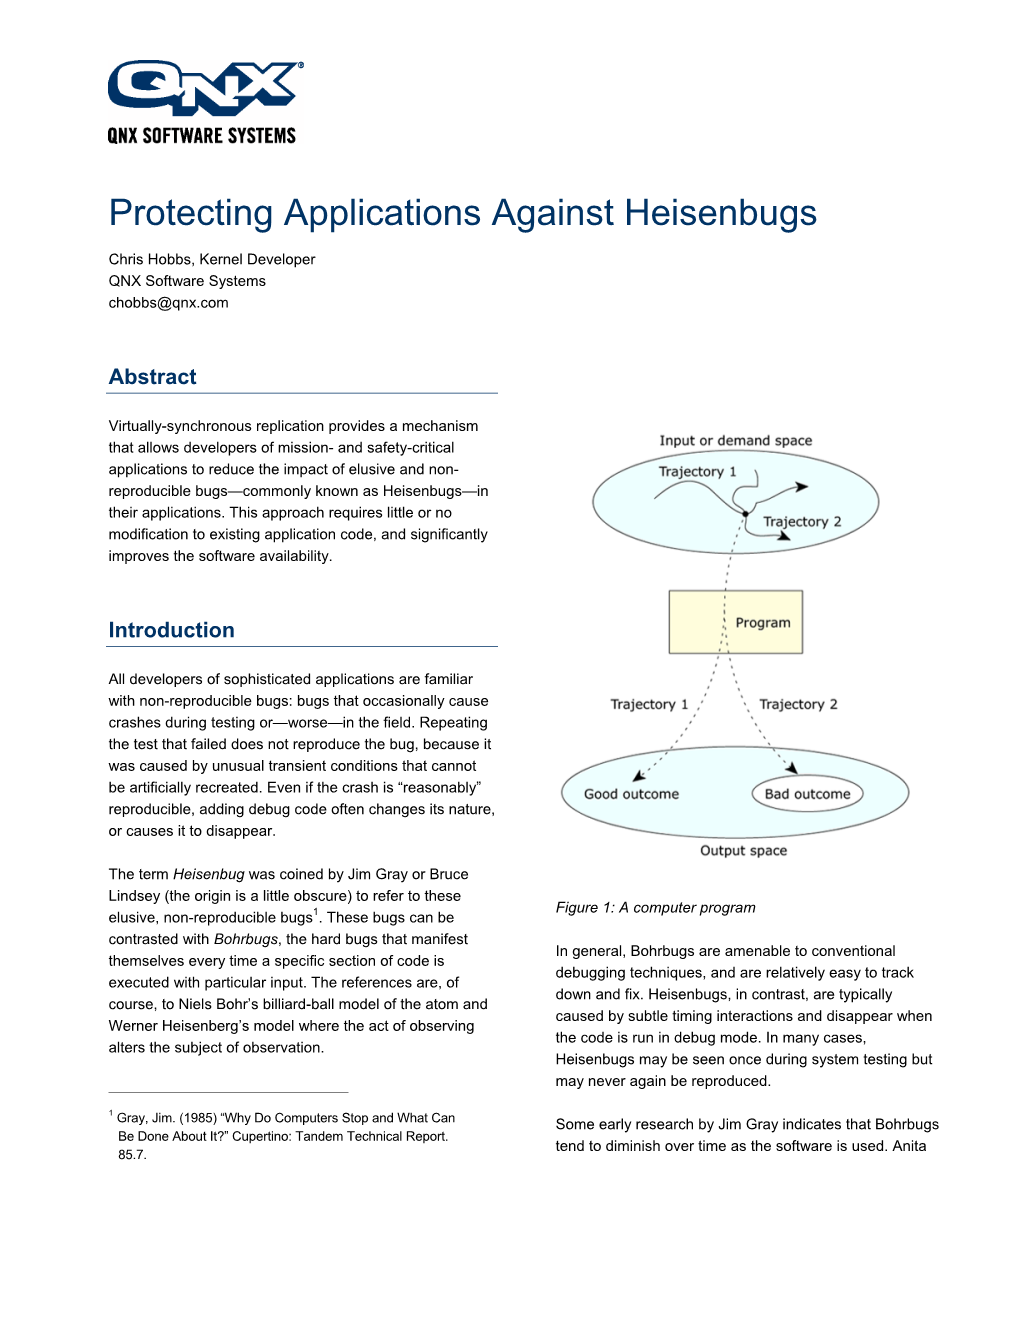 Protecting Applications Against Heisenbugs